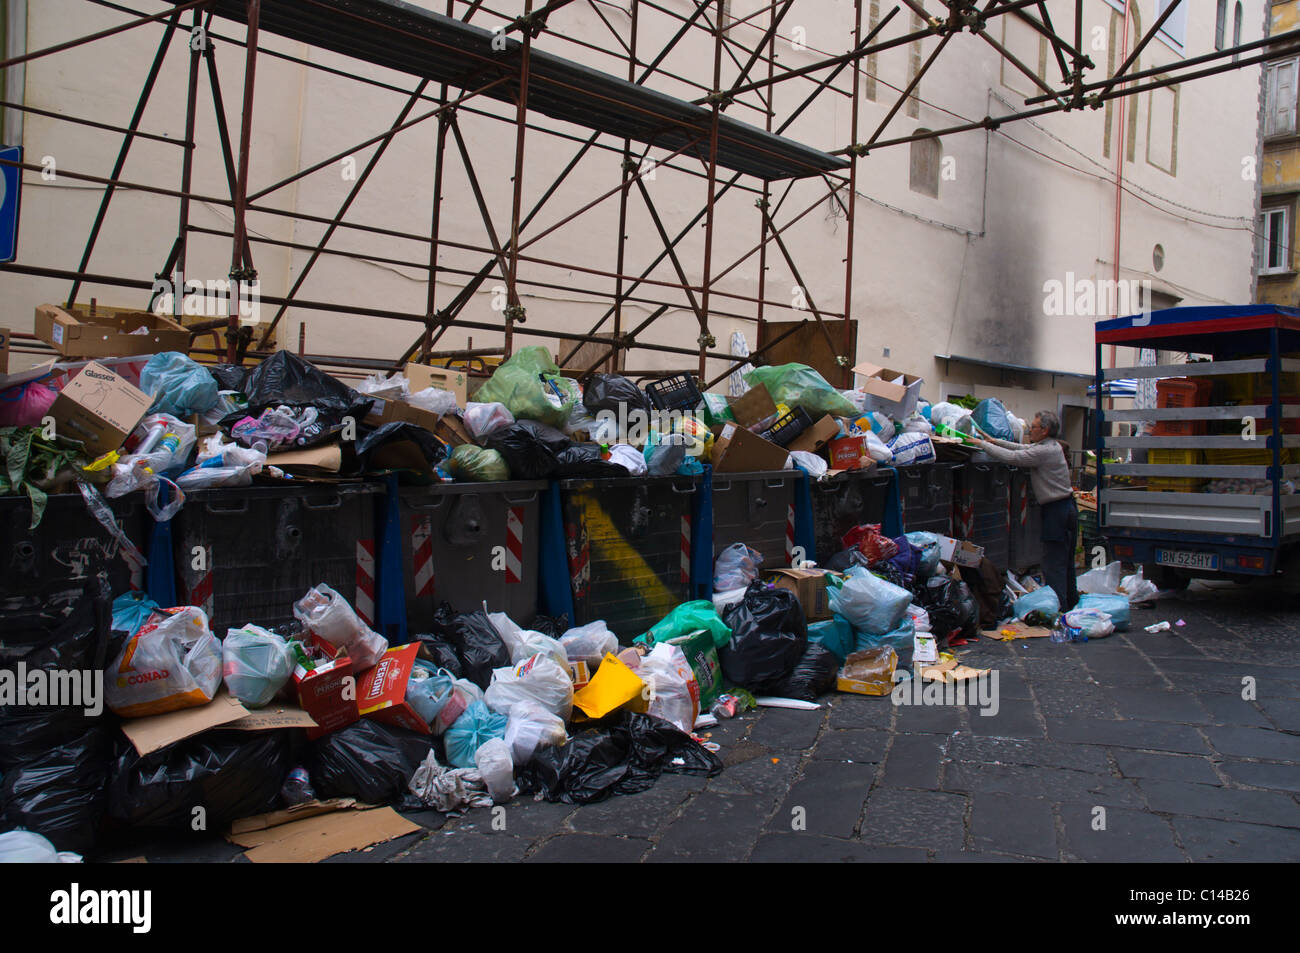 Uncollected rubbish because of strike centro storico the old town Naples Campania Italy Europe Stock Photo